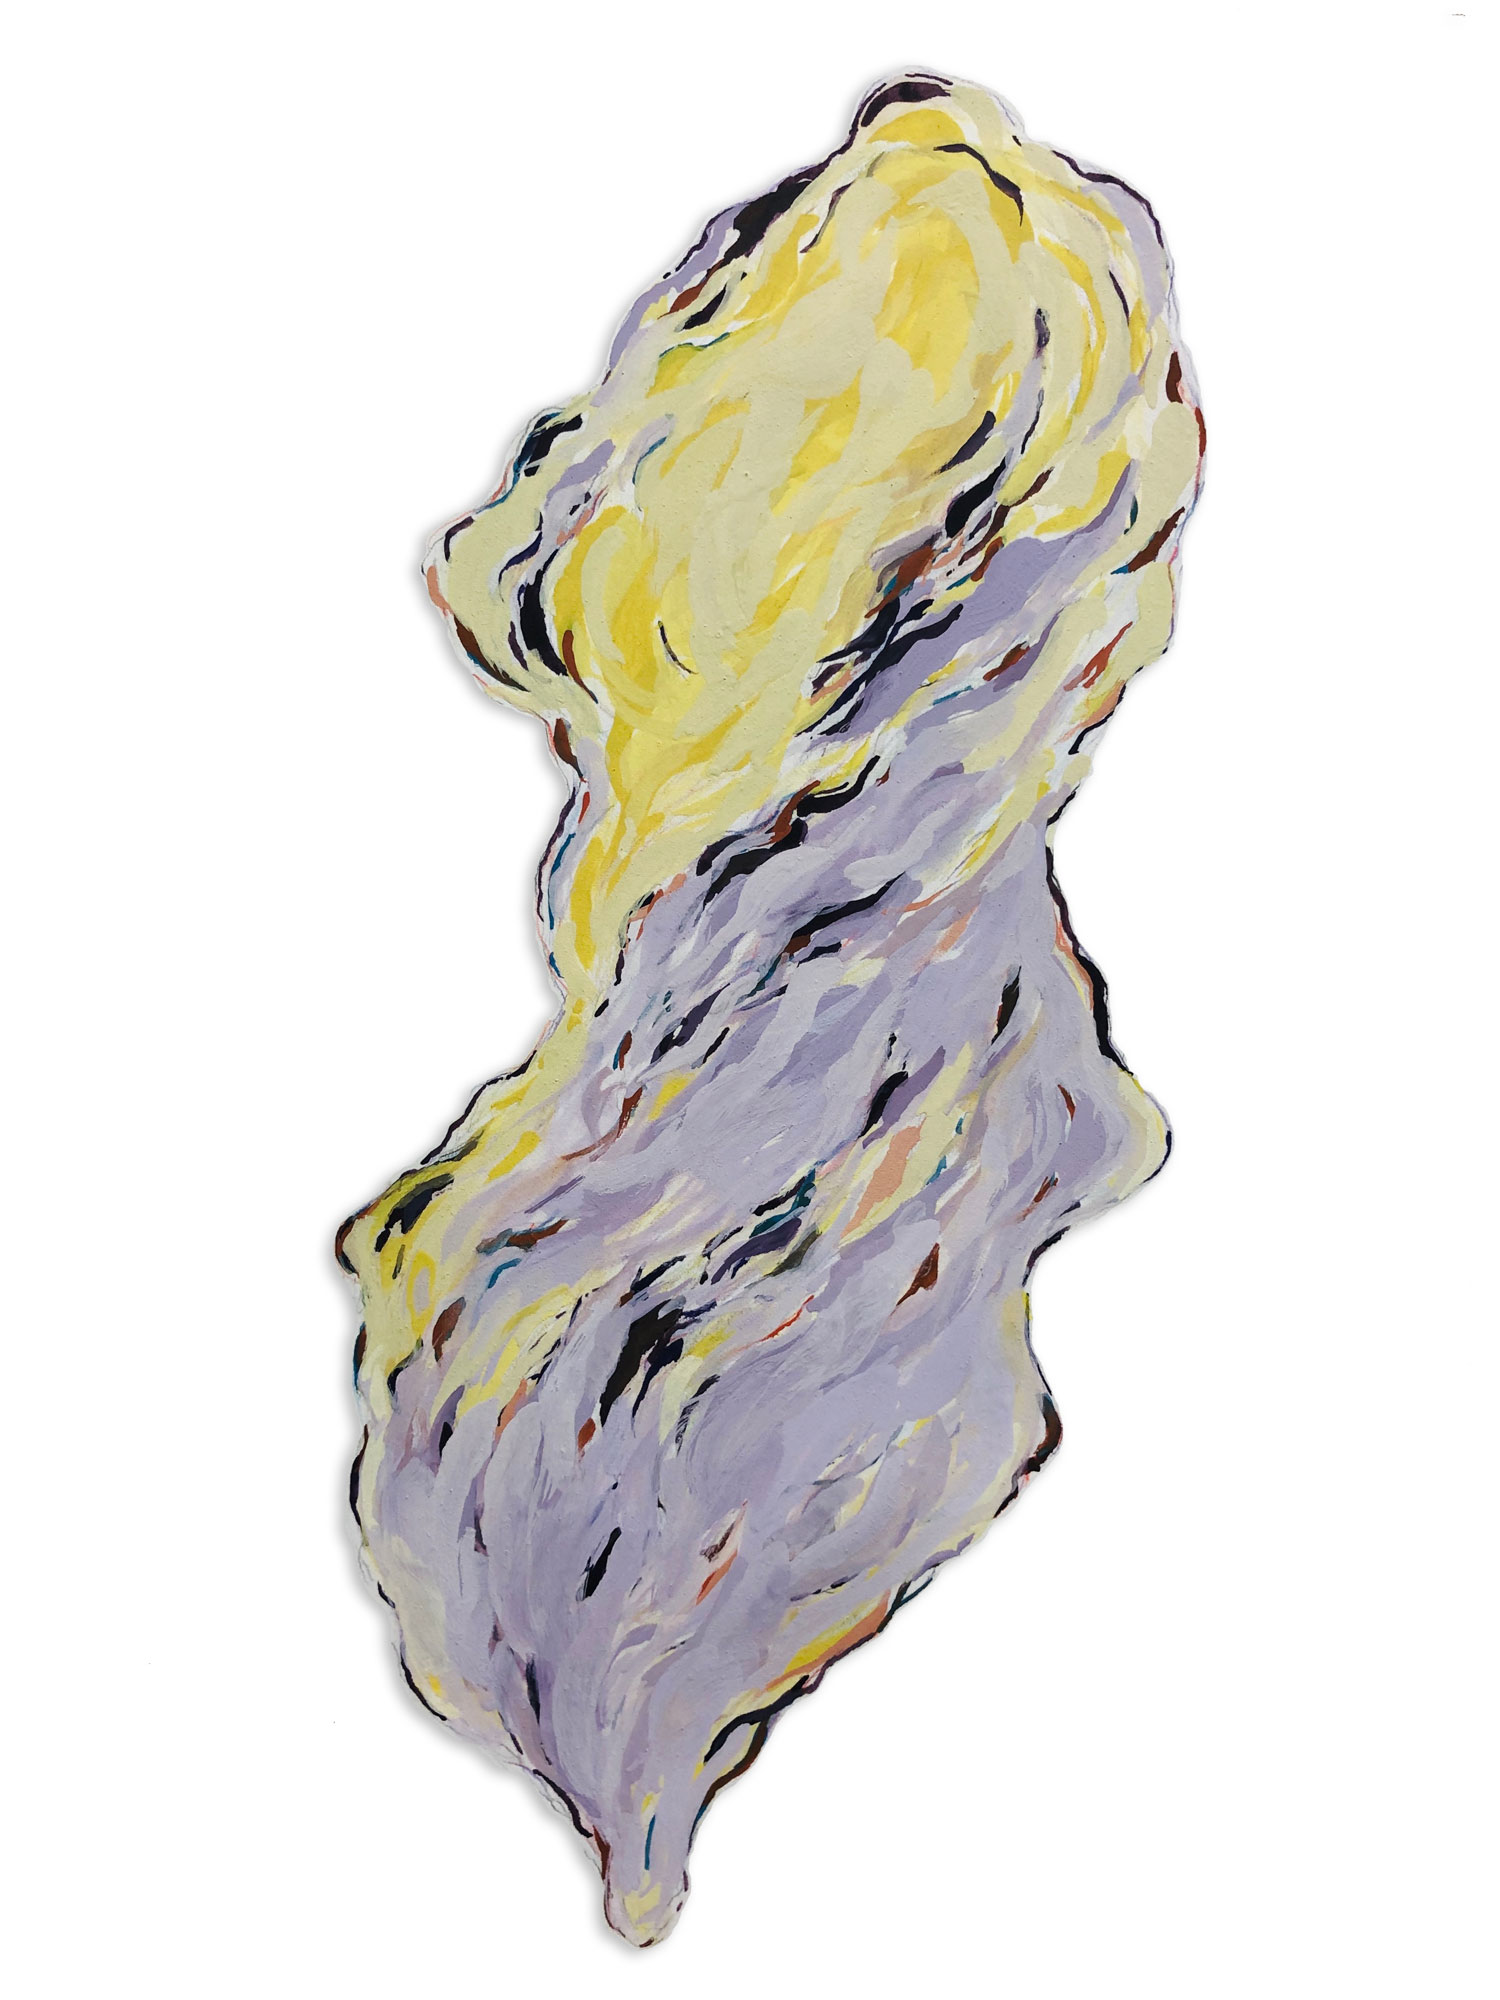 Untitled (Yellow and Violet)